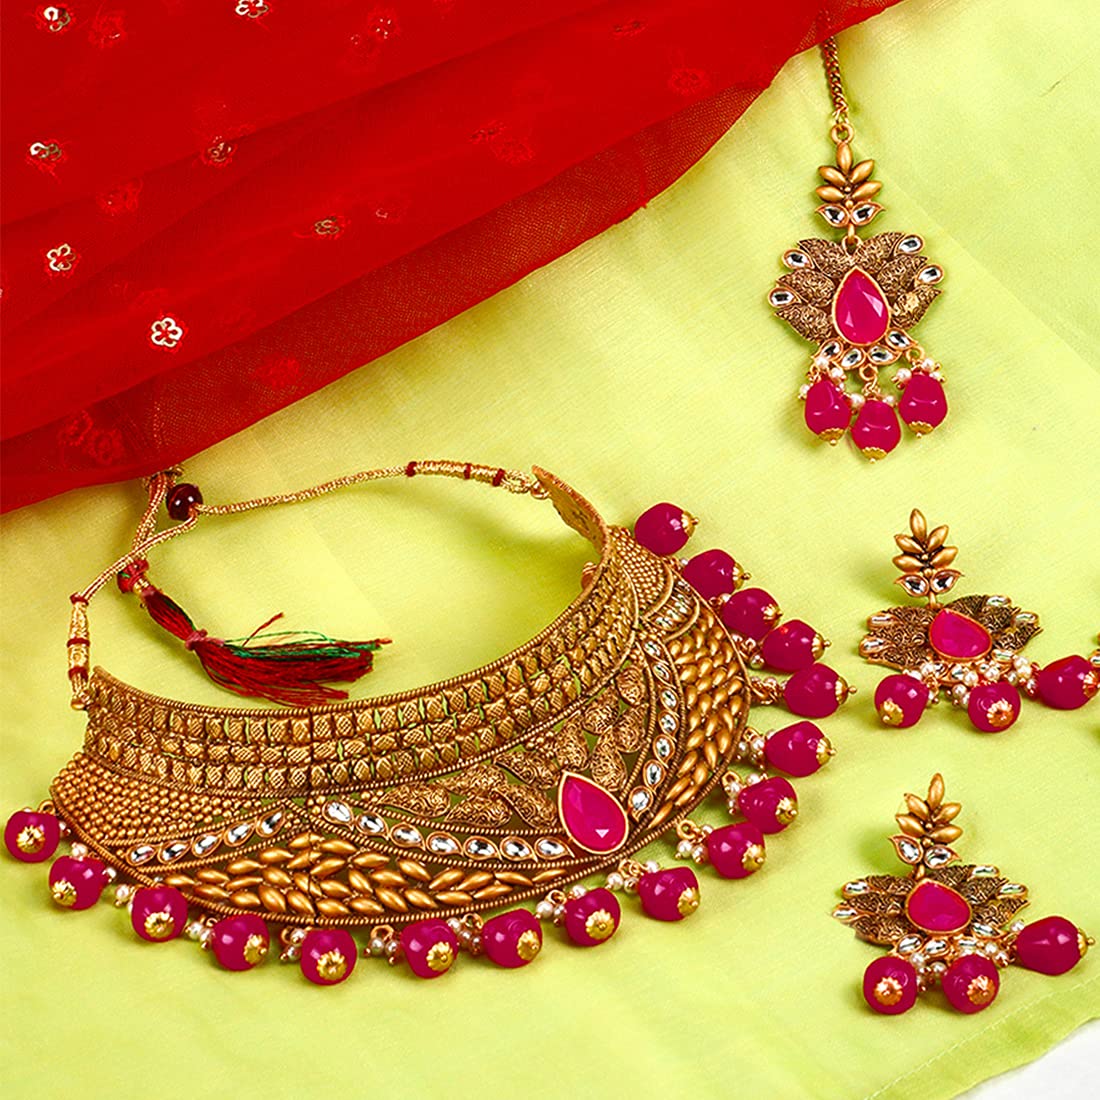 Yellow Chimes Gold Plated Traditional Kundan Studded Pink Pearl Choker Necklace Set with Chandbali Earrings and Maang Tikka Bridal Jewellery Set for Women (YCTJNS-09BDSCHK-PK, Gold, Pink, Medium)